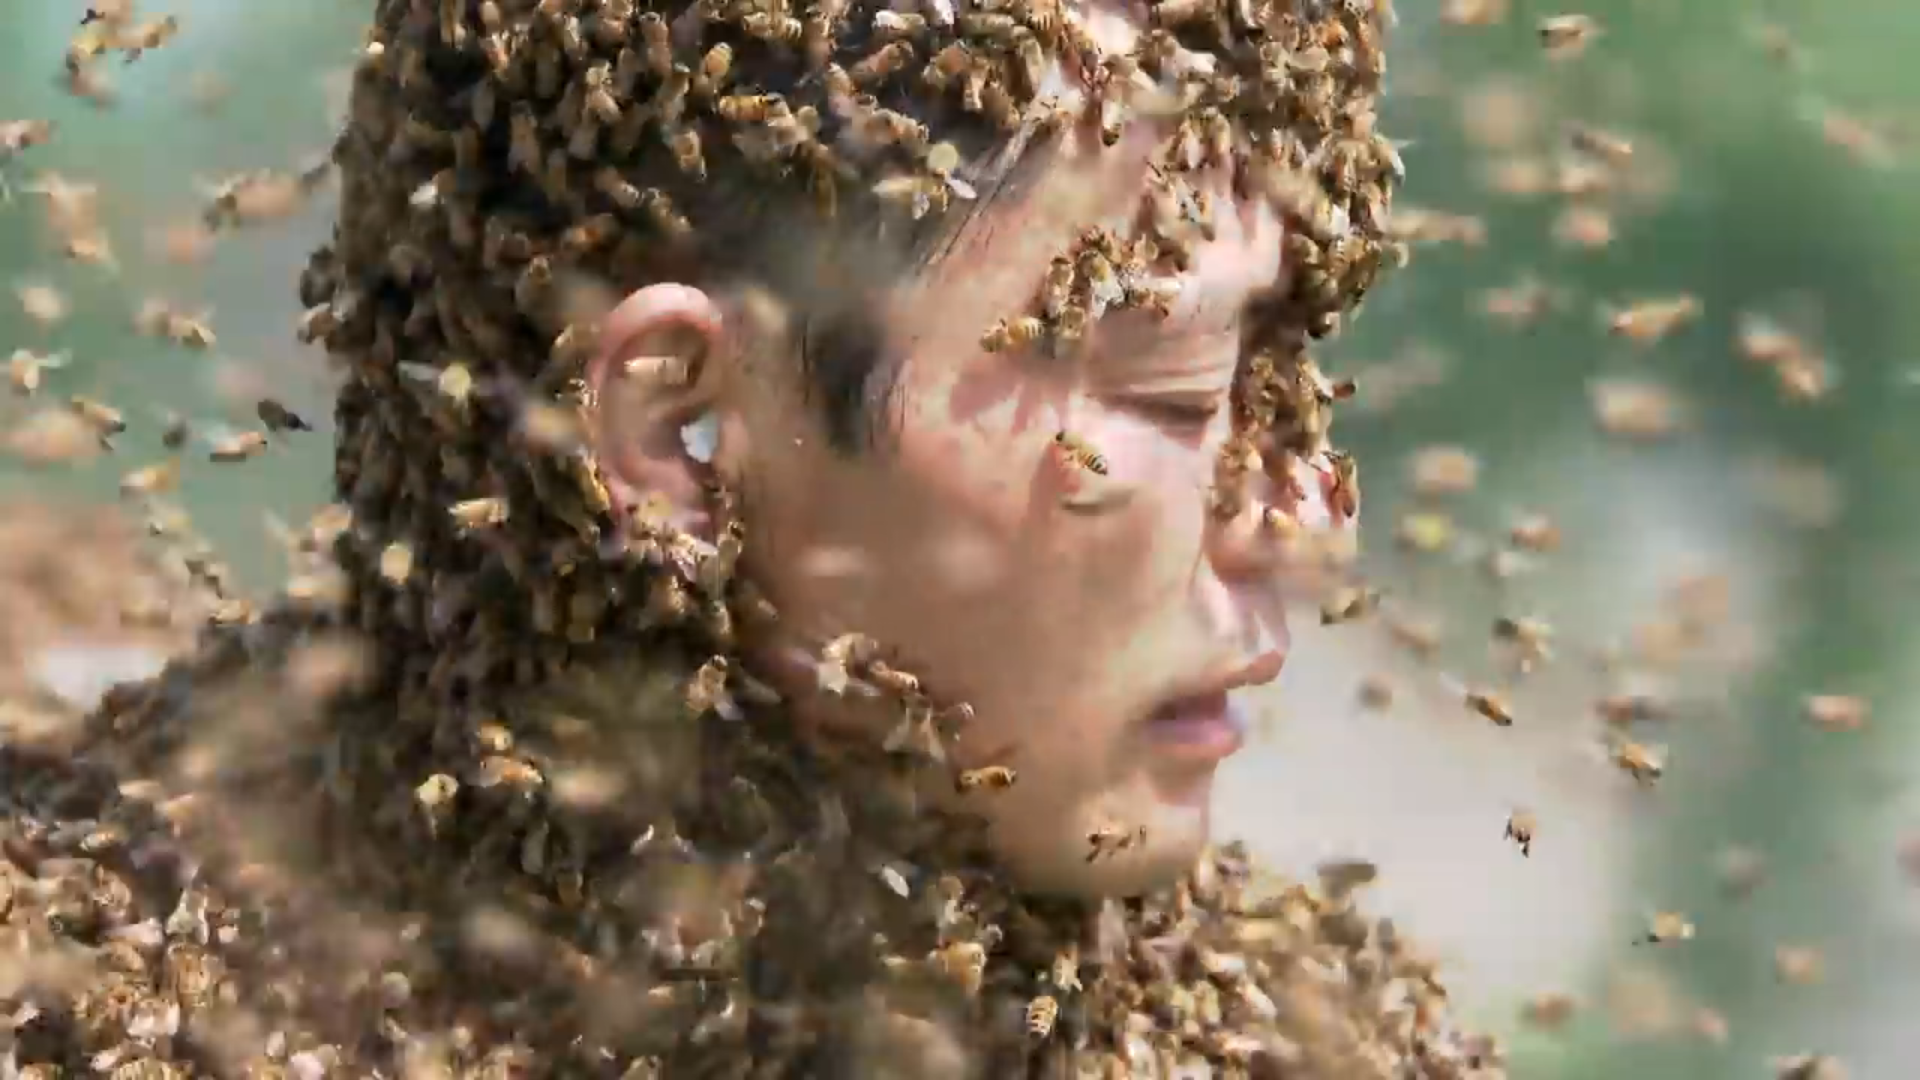 Fearless Chinese man covers entire body in bees